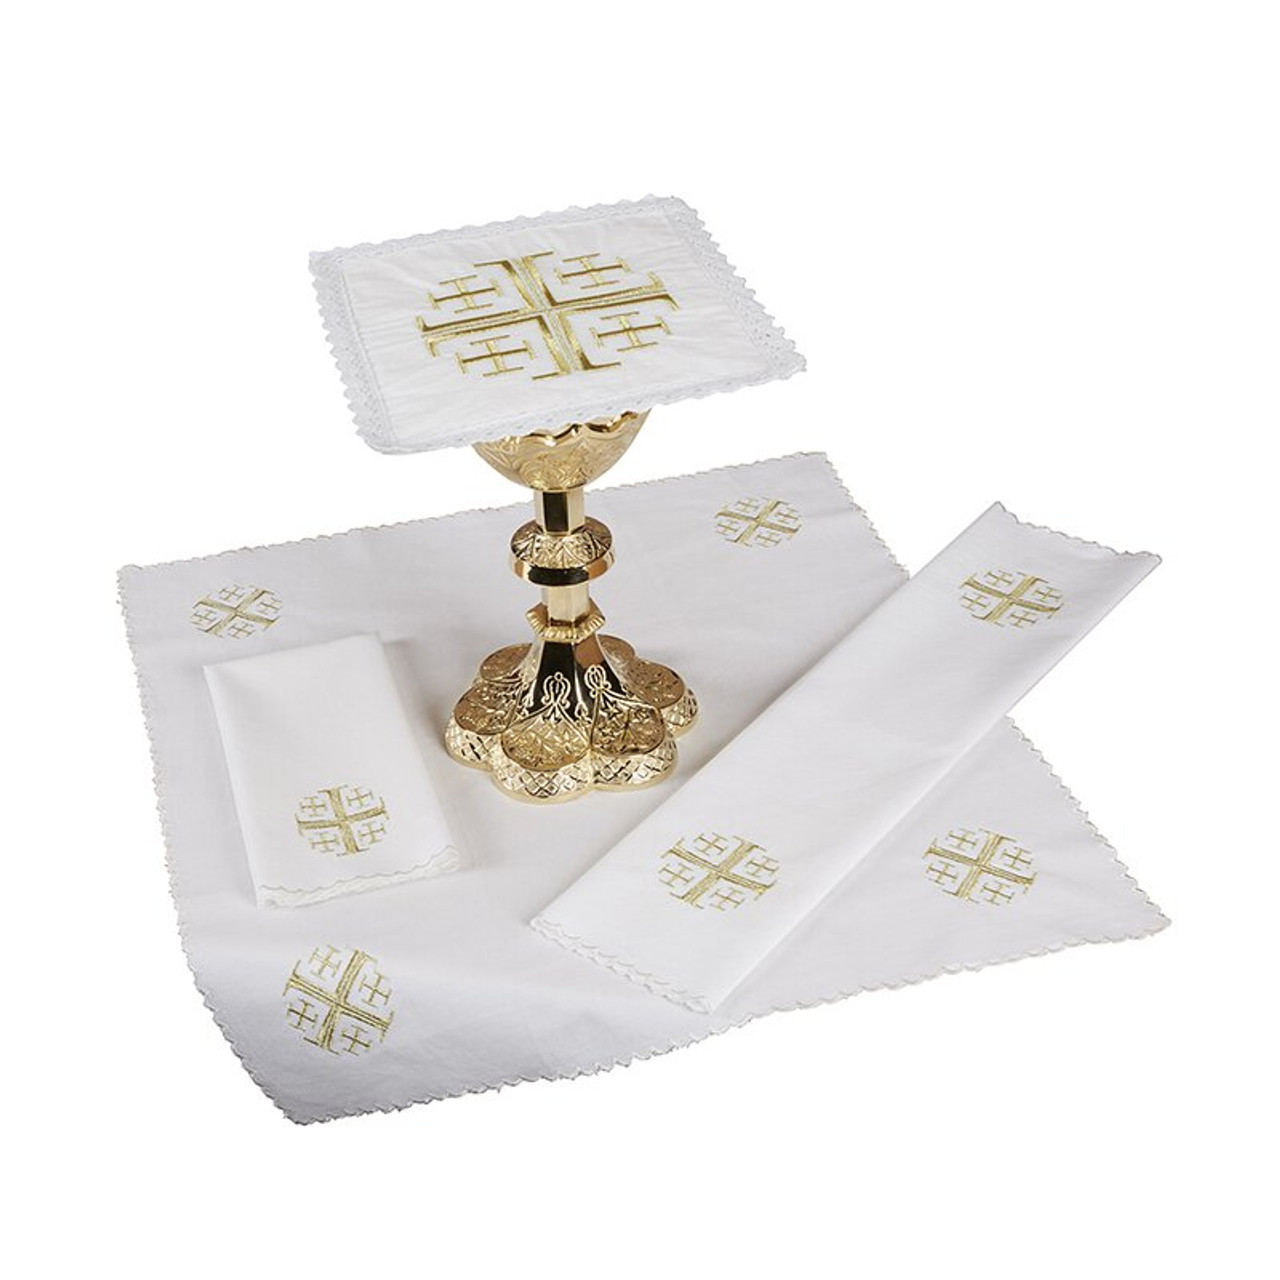 Ciborium with Cross Top by Faithful Gifts